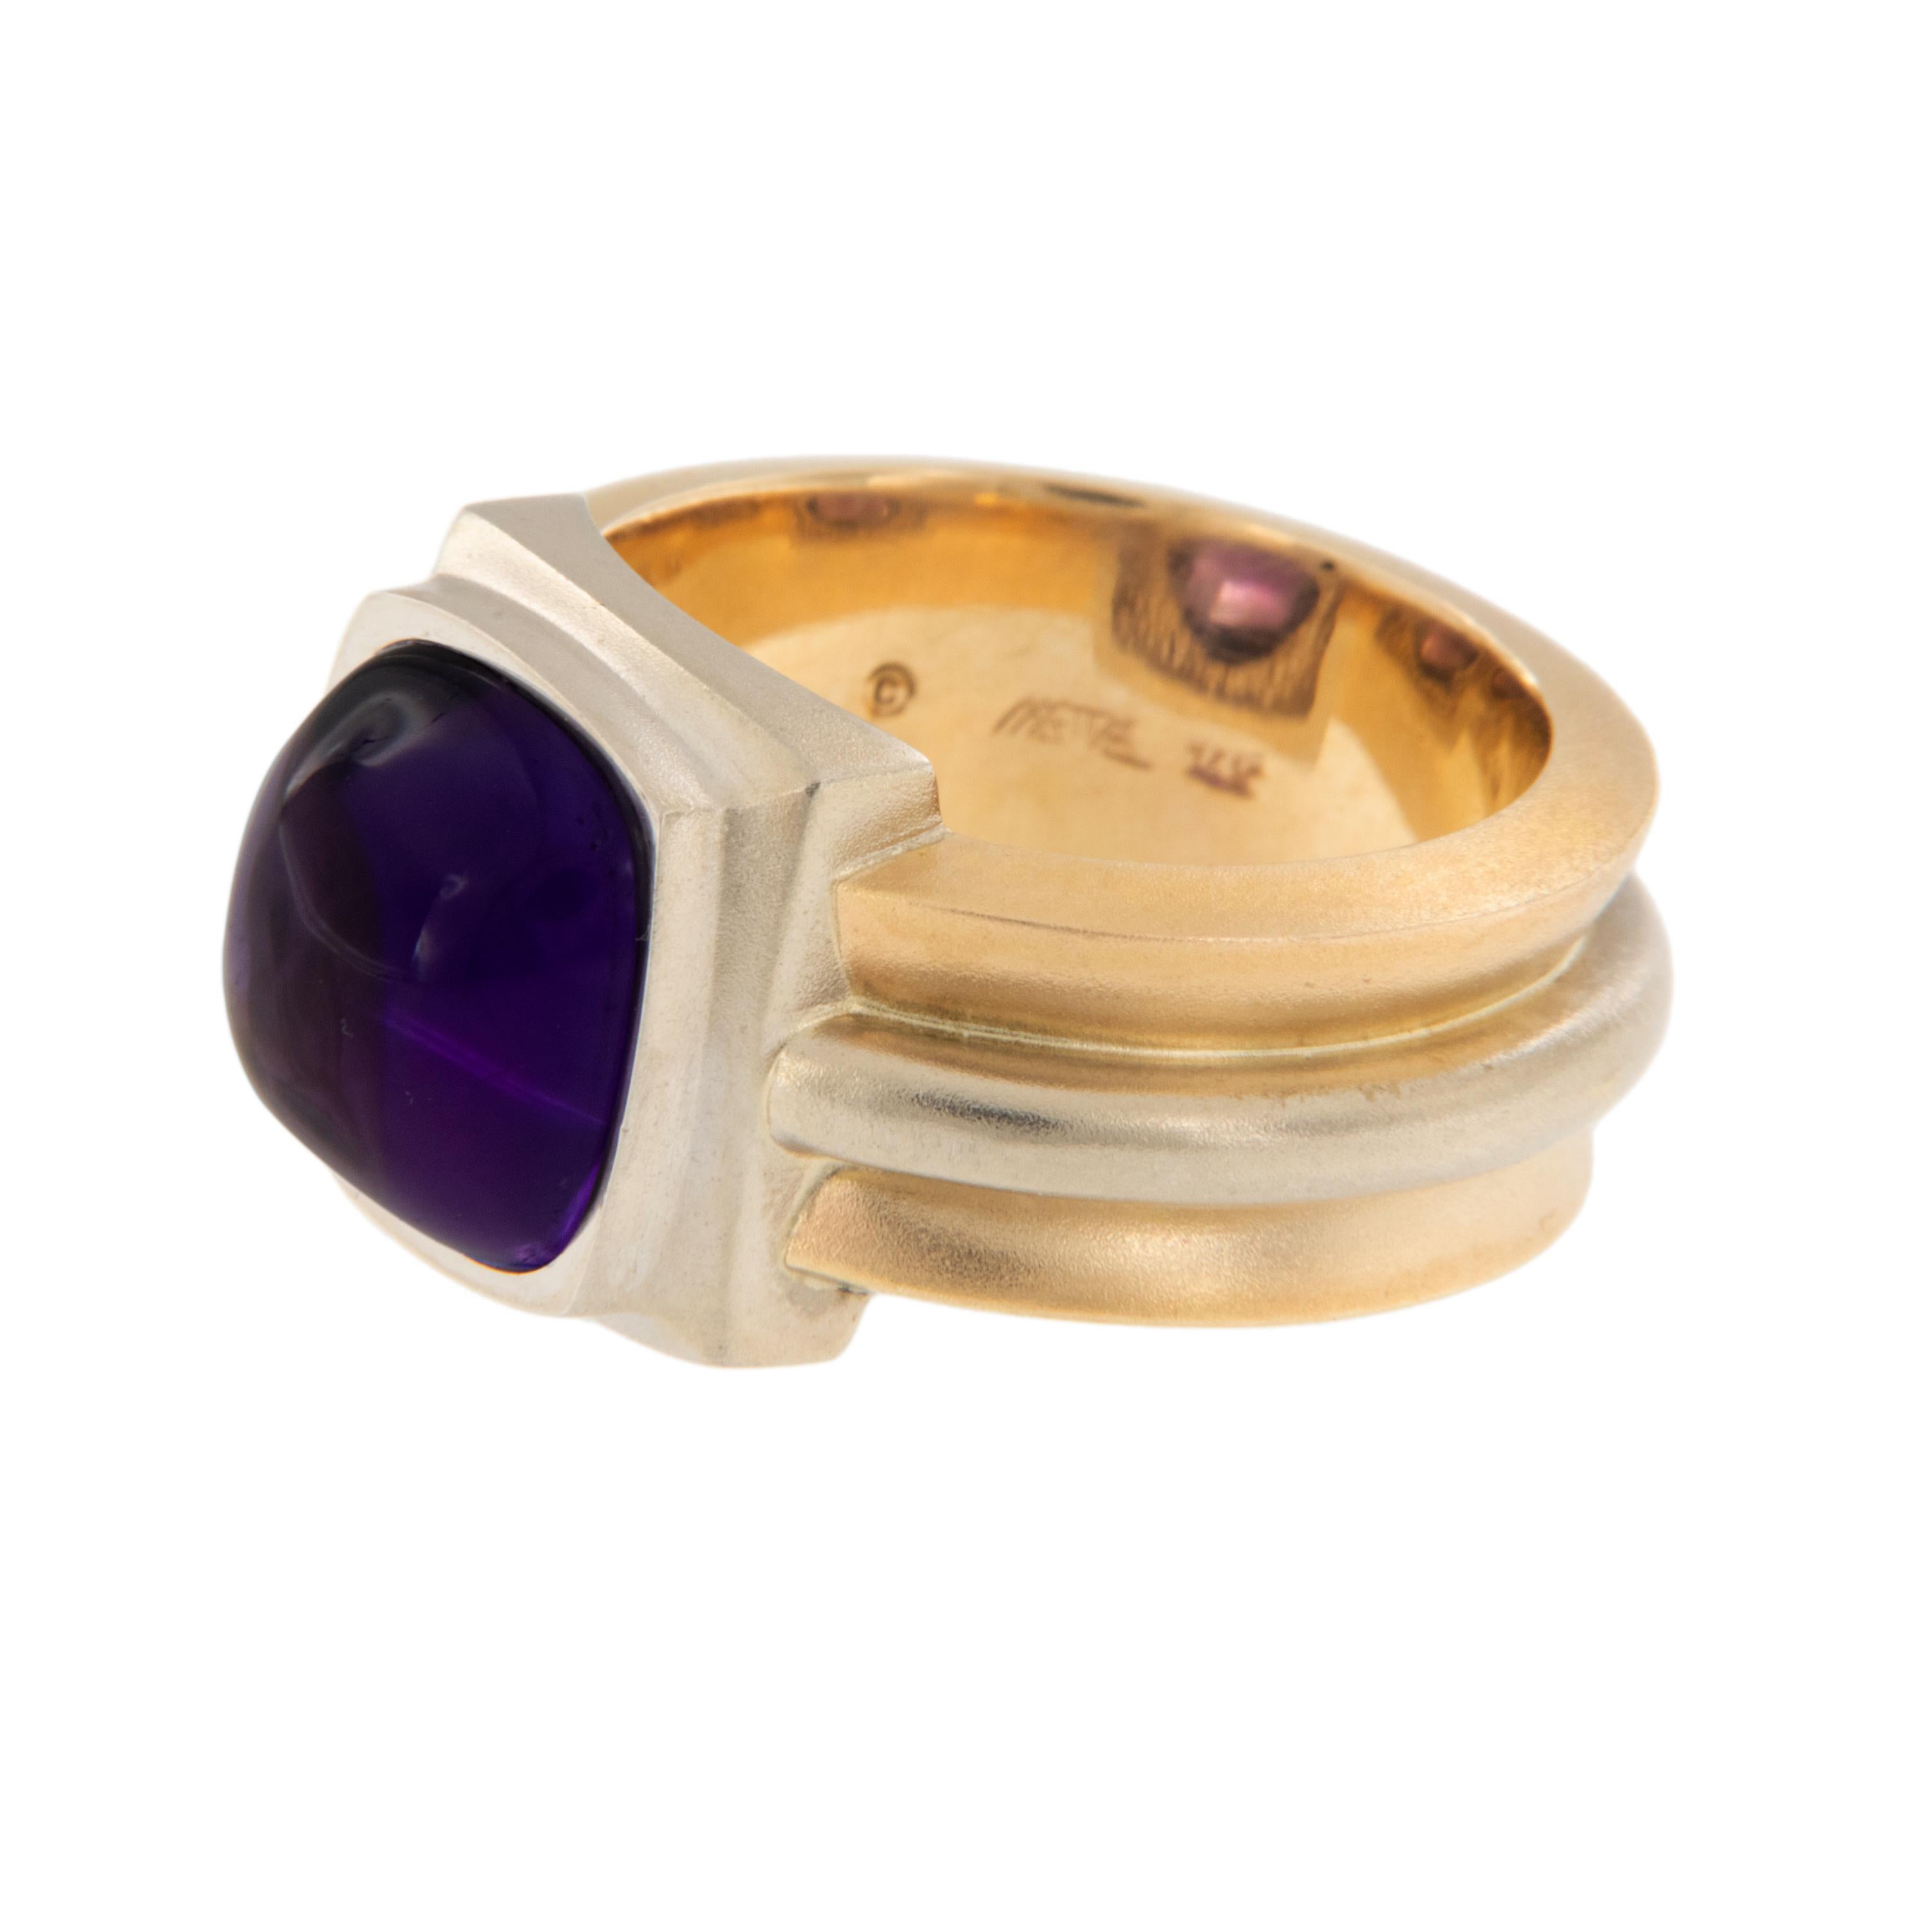 Patrick Irla is known for his beautifully executed contemporary jewelry. Hand assembled 14 karat yellow & white gold, this ring features a 10mm sugarloaf amethyst with gemmy color! Ring was made in a size 6, but can be sized. Complementary signature